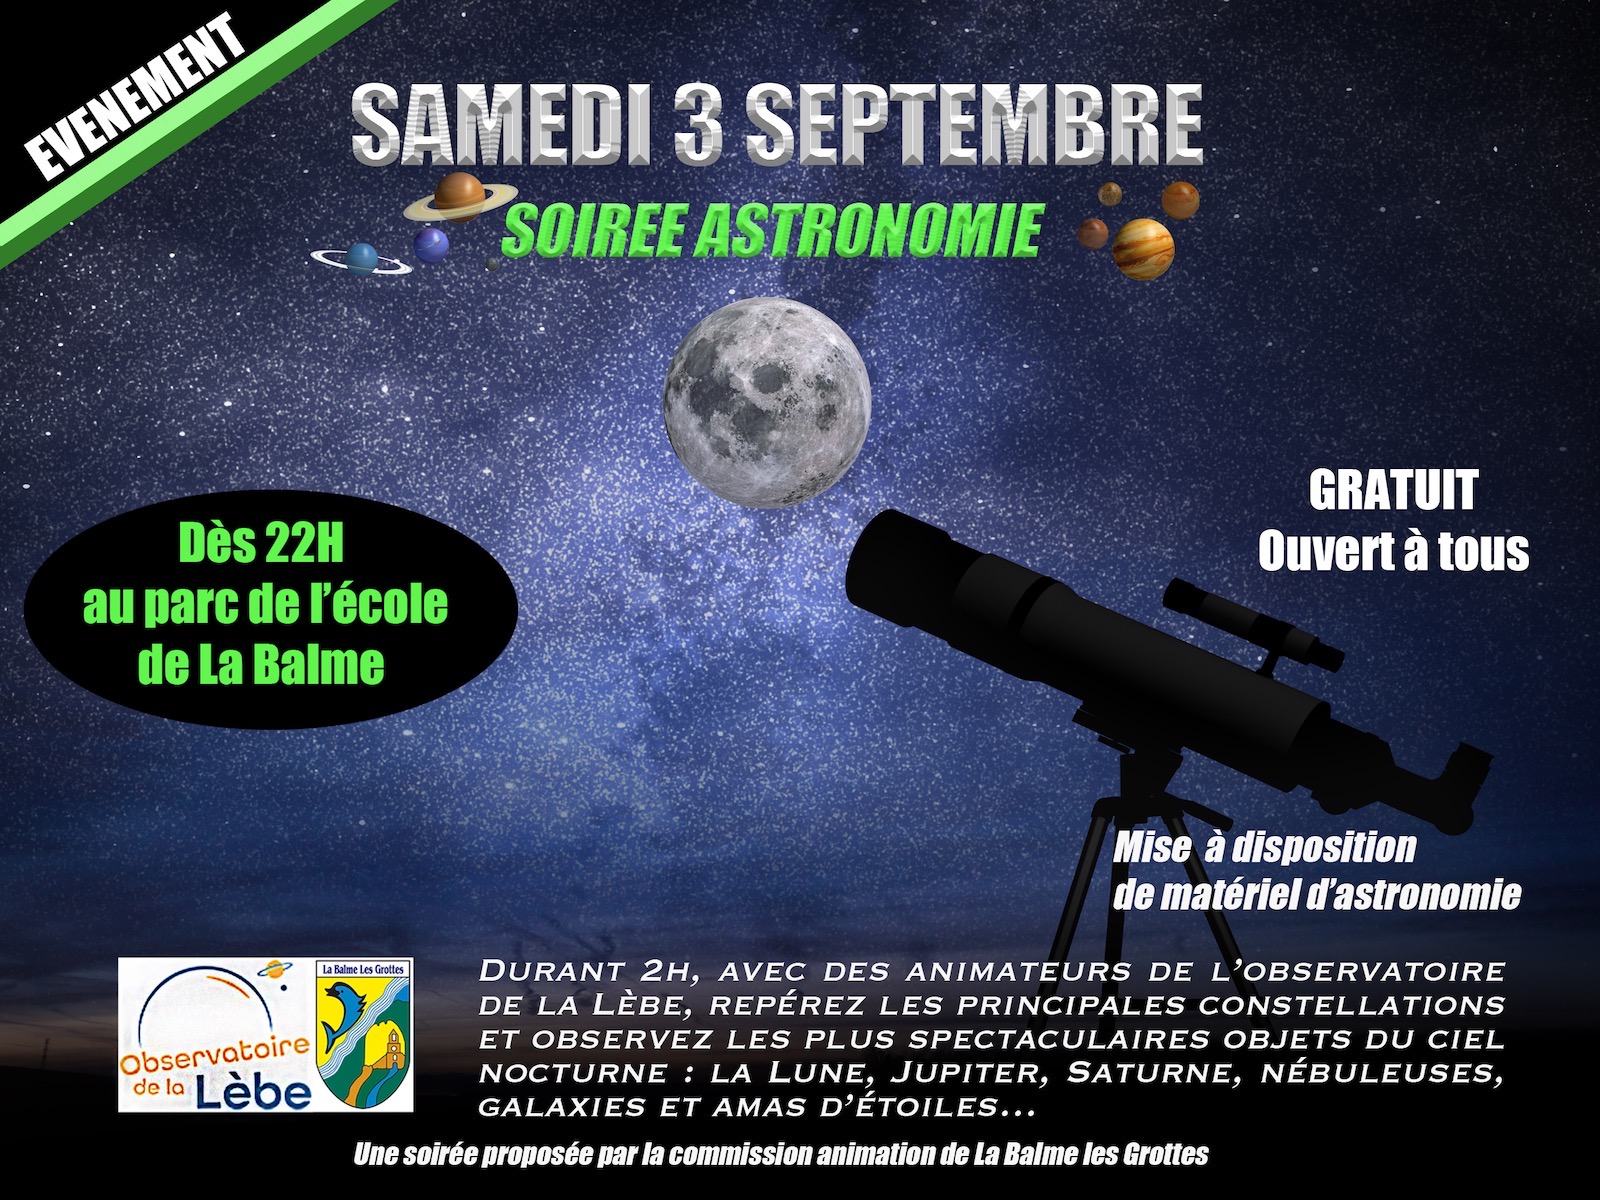 You are currently viewing Samedi 3 septembre: soirée astronomie